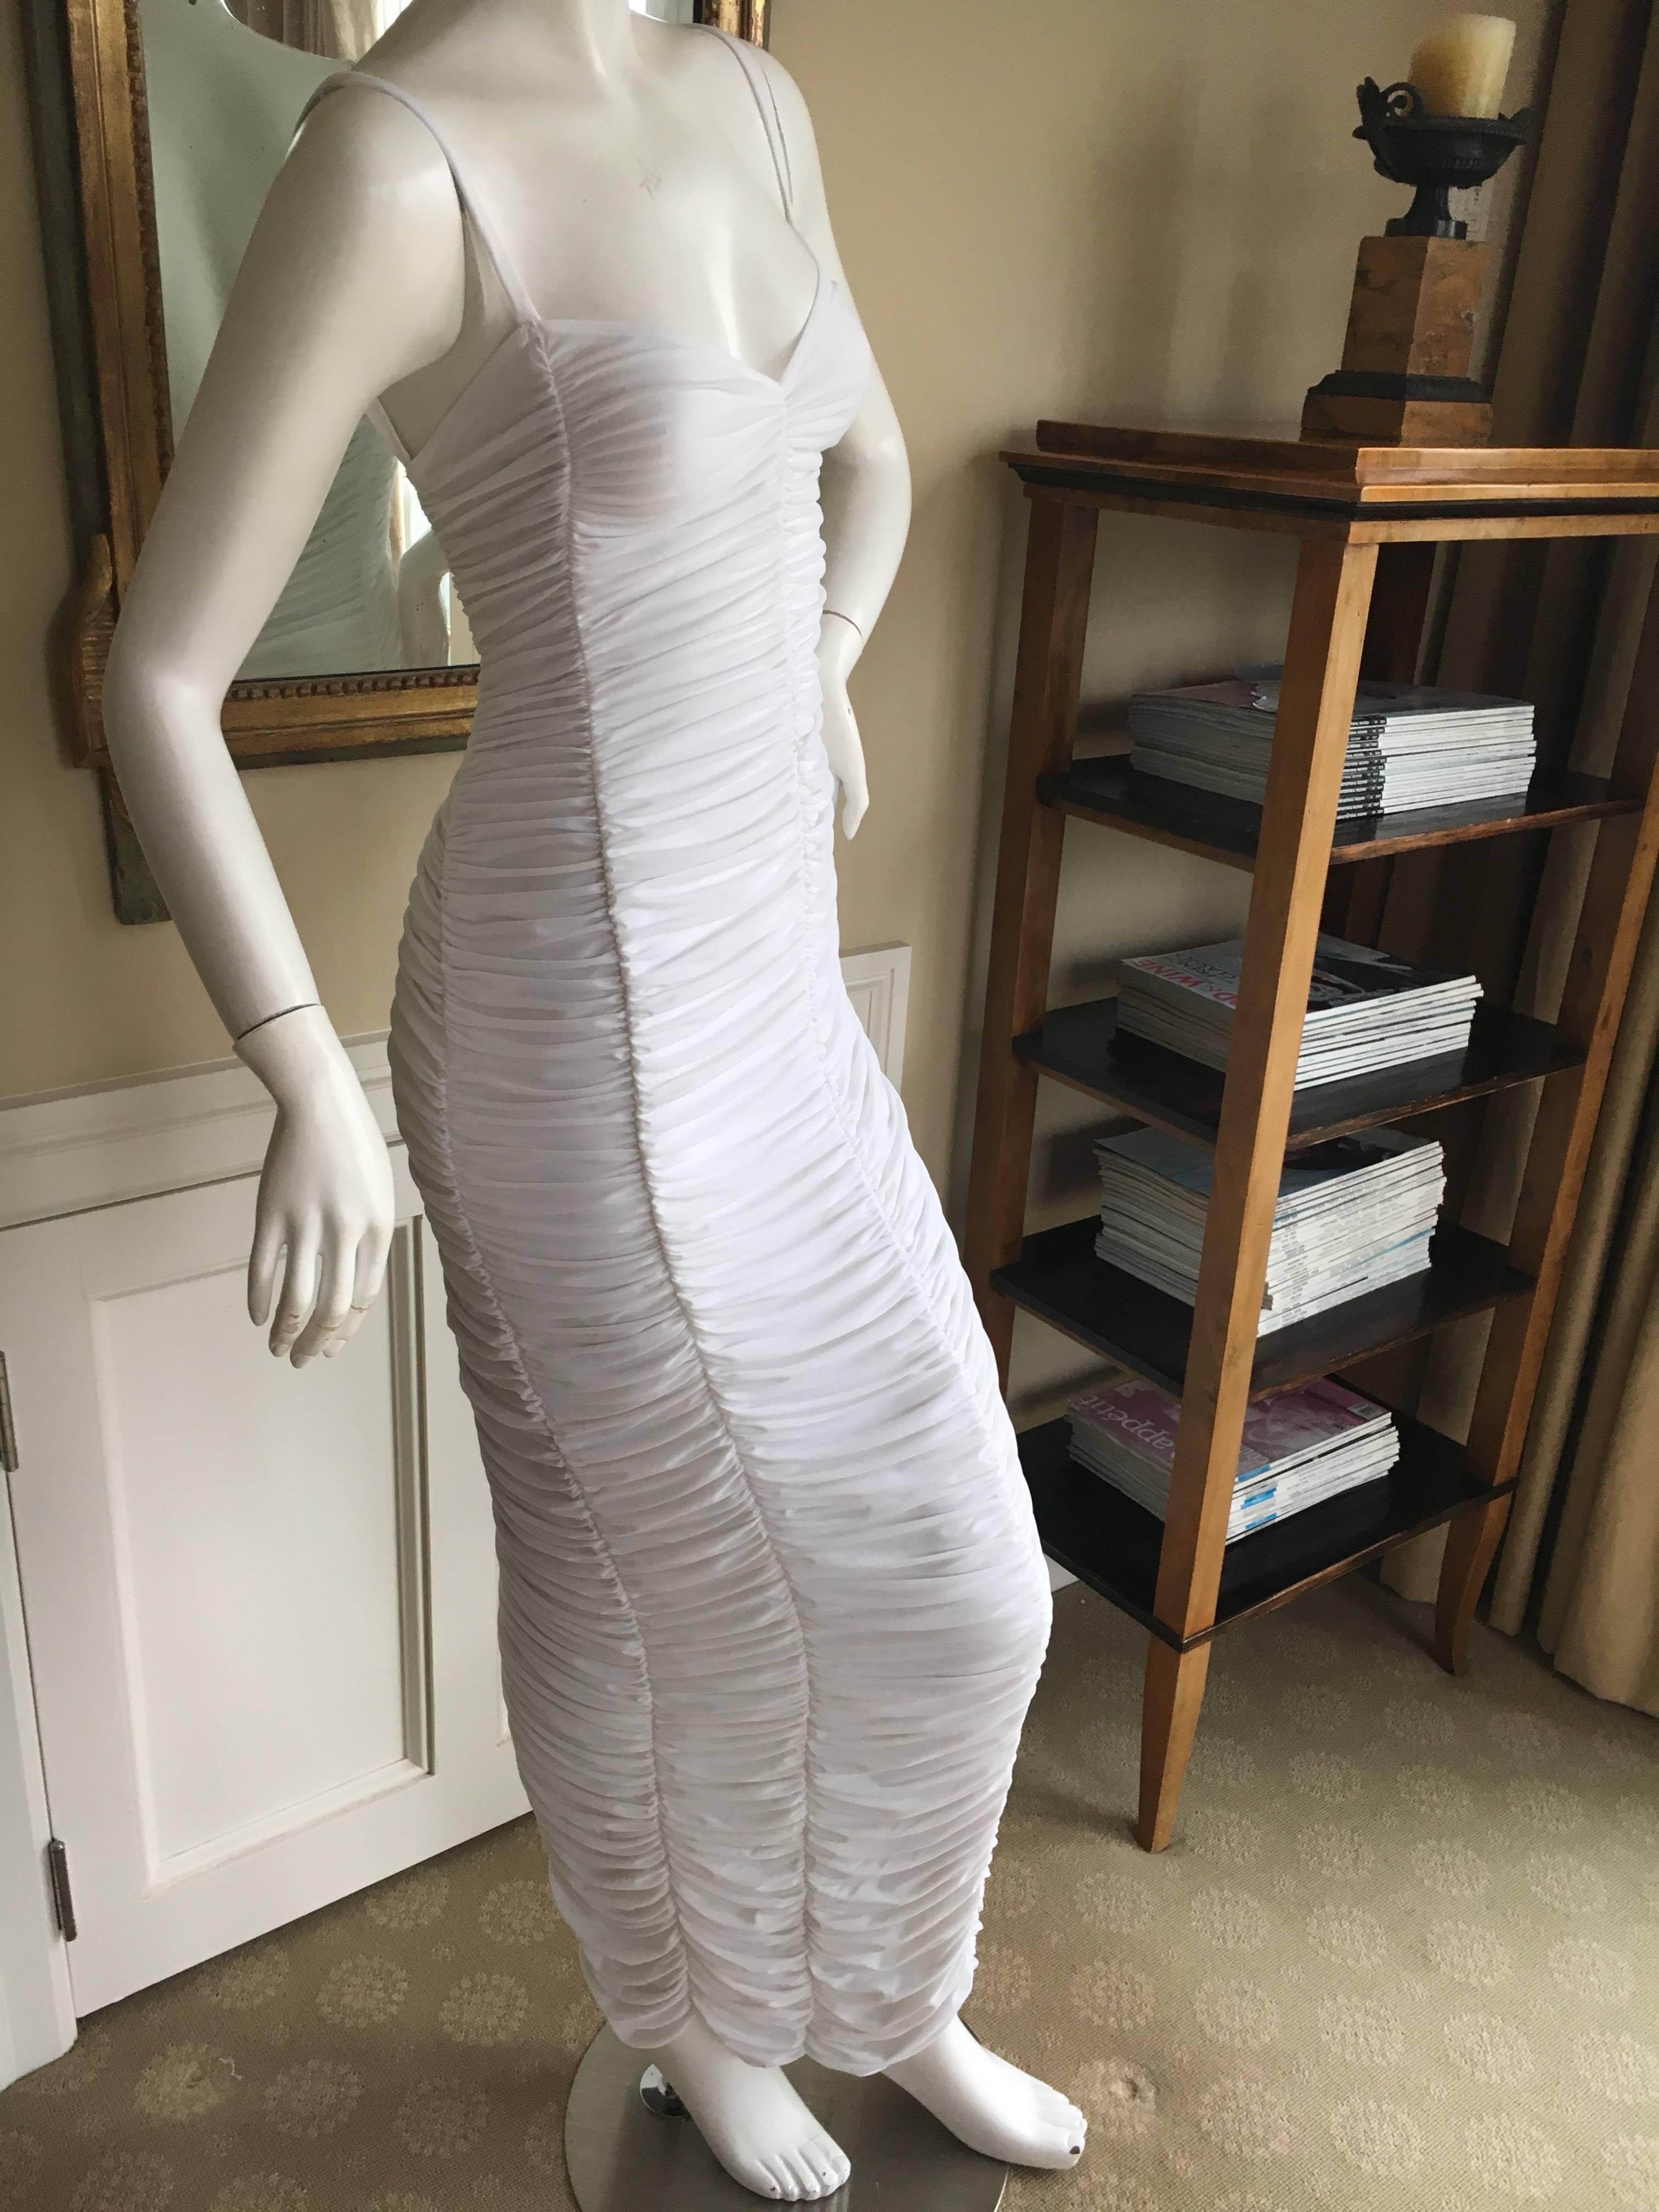 Iconic 1970's parachute dress from Norma Kamali.
Such a genius dress at the time, just wriggle in to it and disco down.
Bust 34"
Waist 26"
Hips 42"
Length 61"
Excellent condition